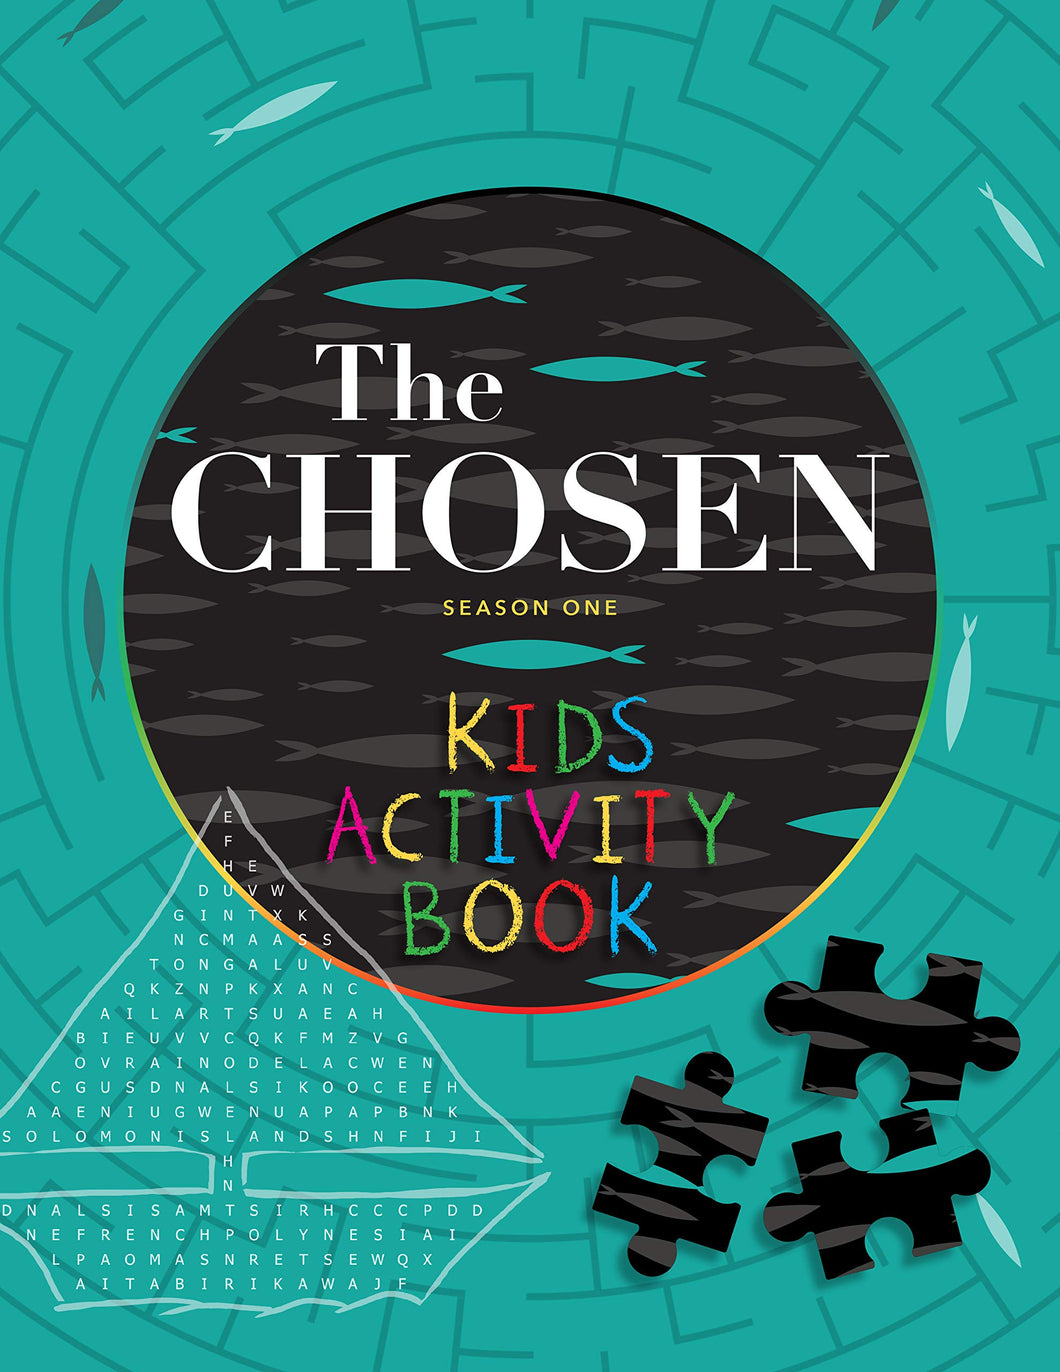 The Chosen (Season One) Kids Activity Book (Ages 6-12)